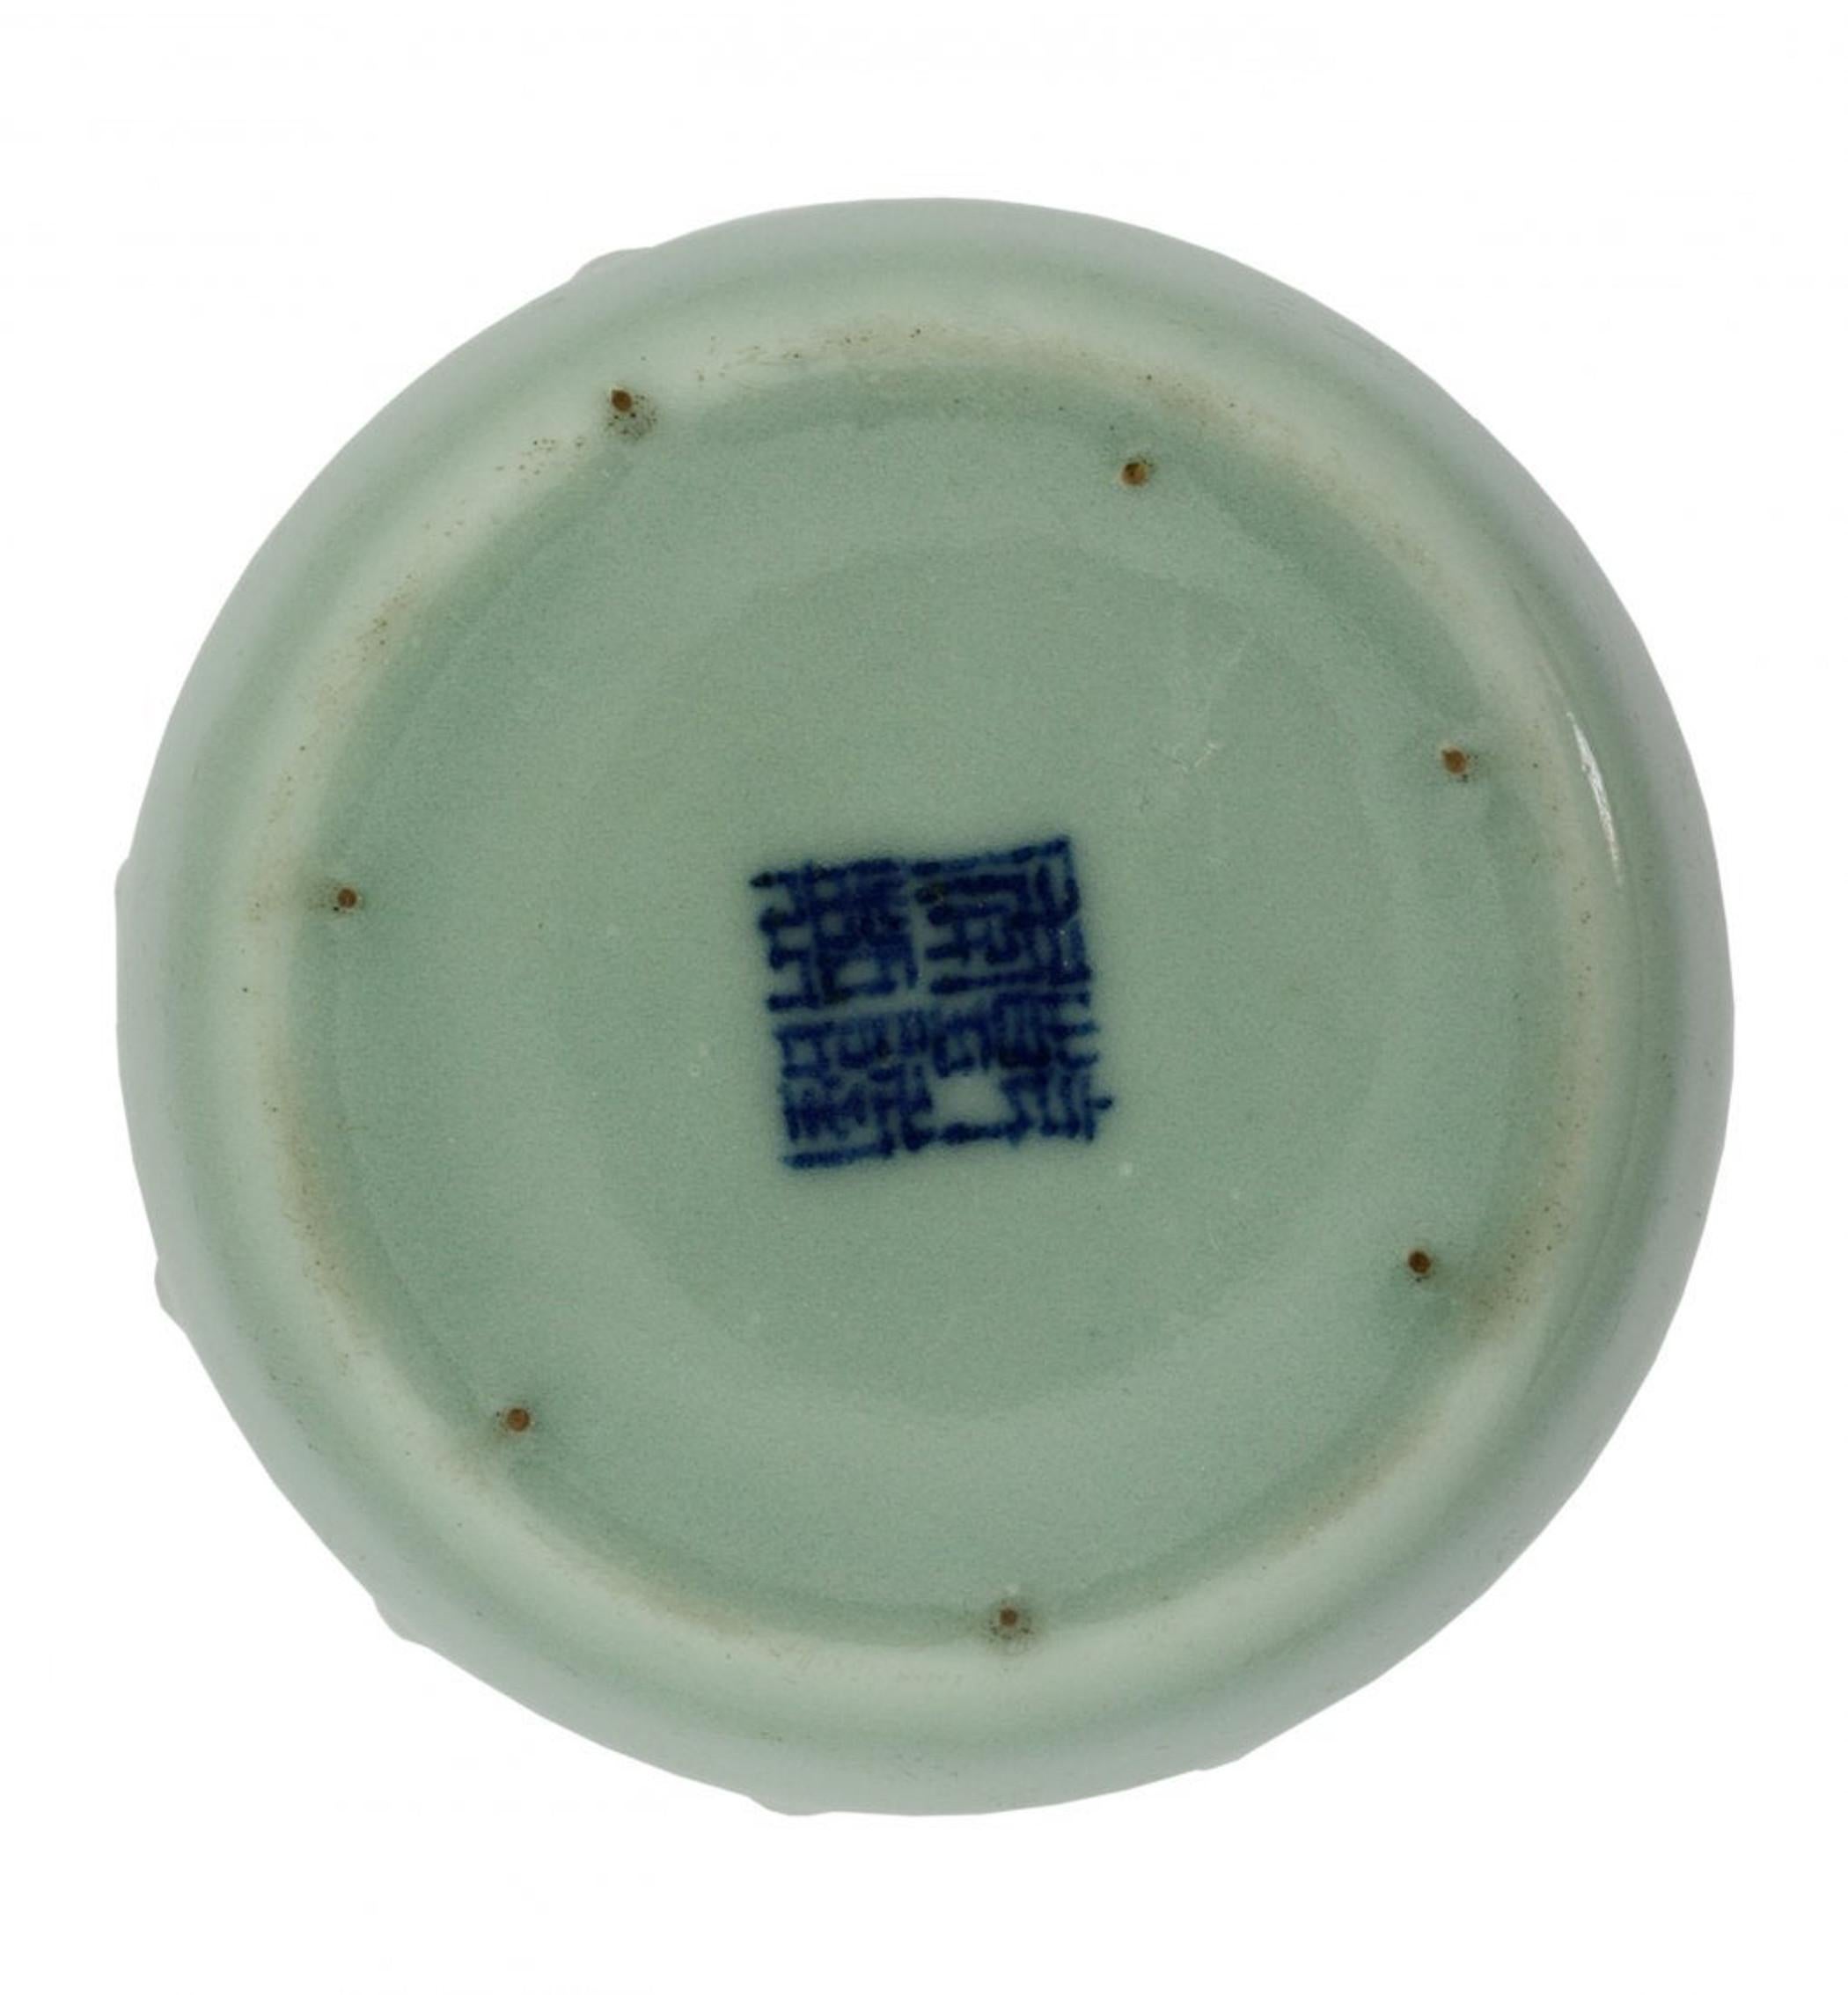 A Small Celadon Porcelain Bowl, Chinese
Of circular form, with upright sides supported on a flat base, covered overall with a sage-green glaze
With four-character mark, 
Measures: Height 2.7 in. (6.85 cm.)

For many centuries, celadon wares